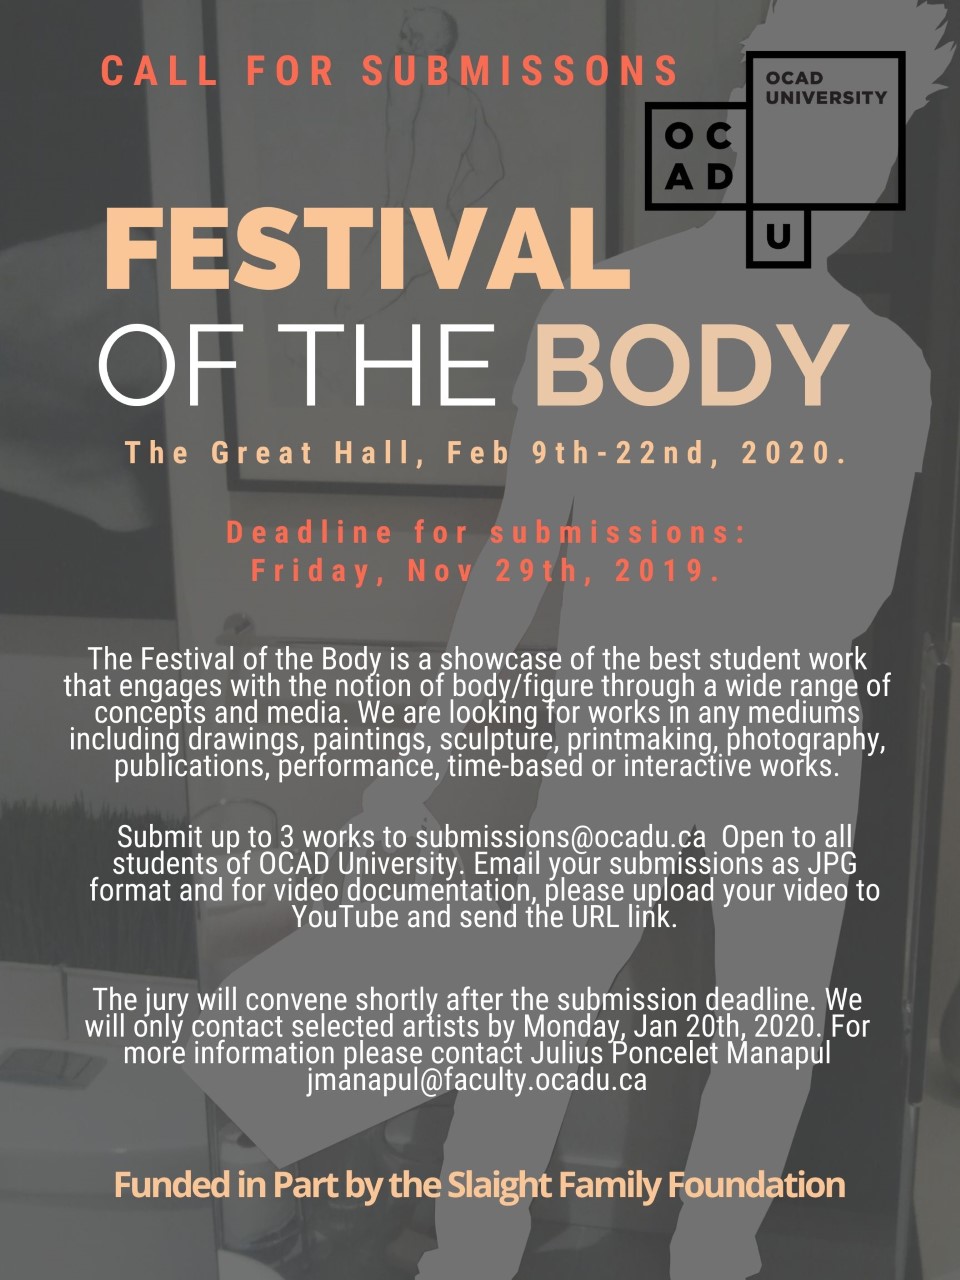 poster for submissions to the festival of the body